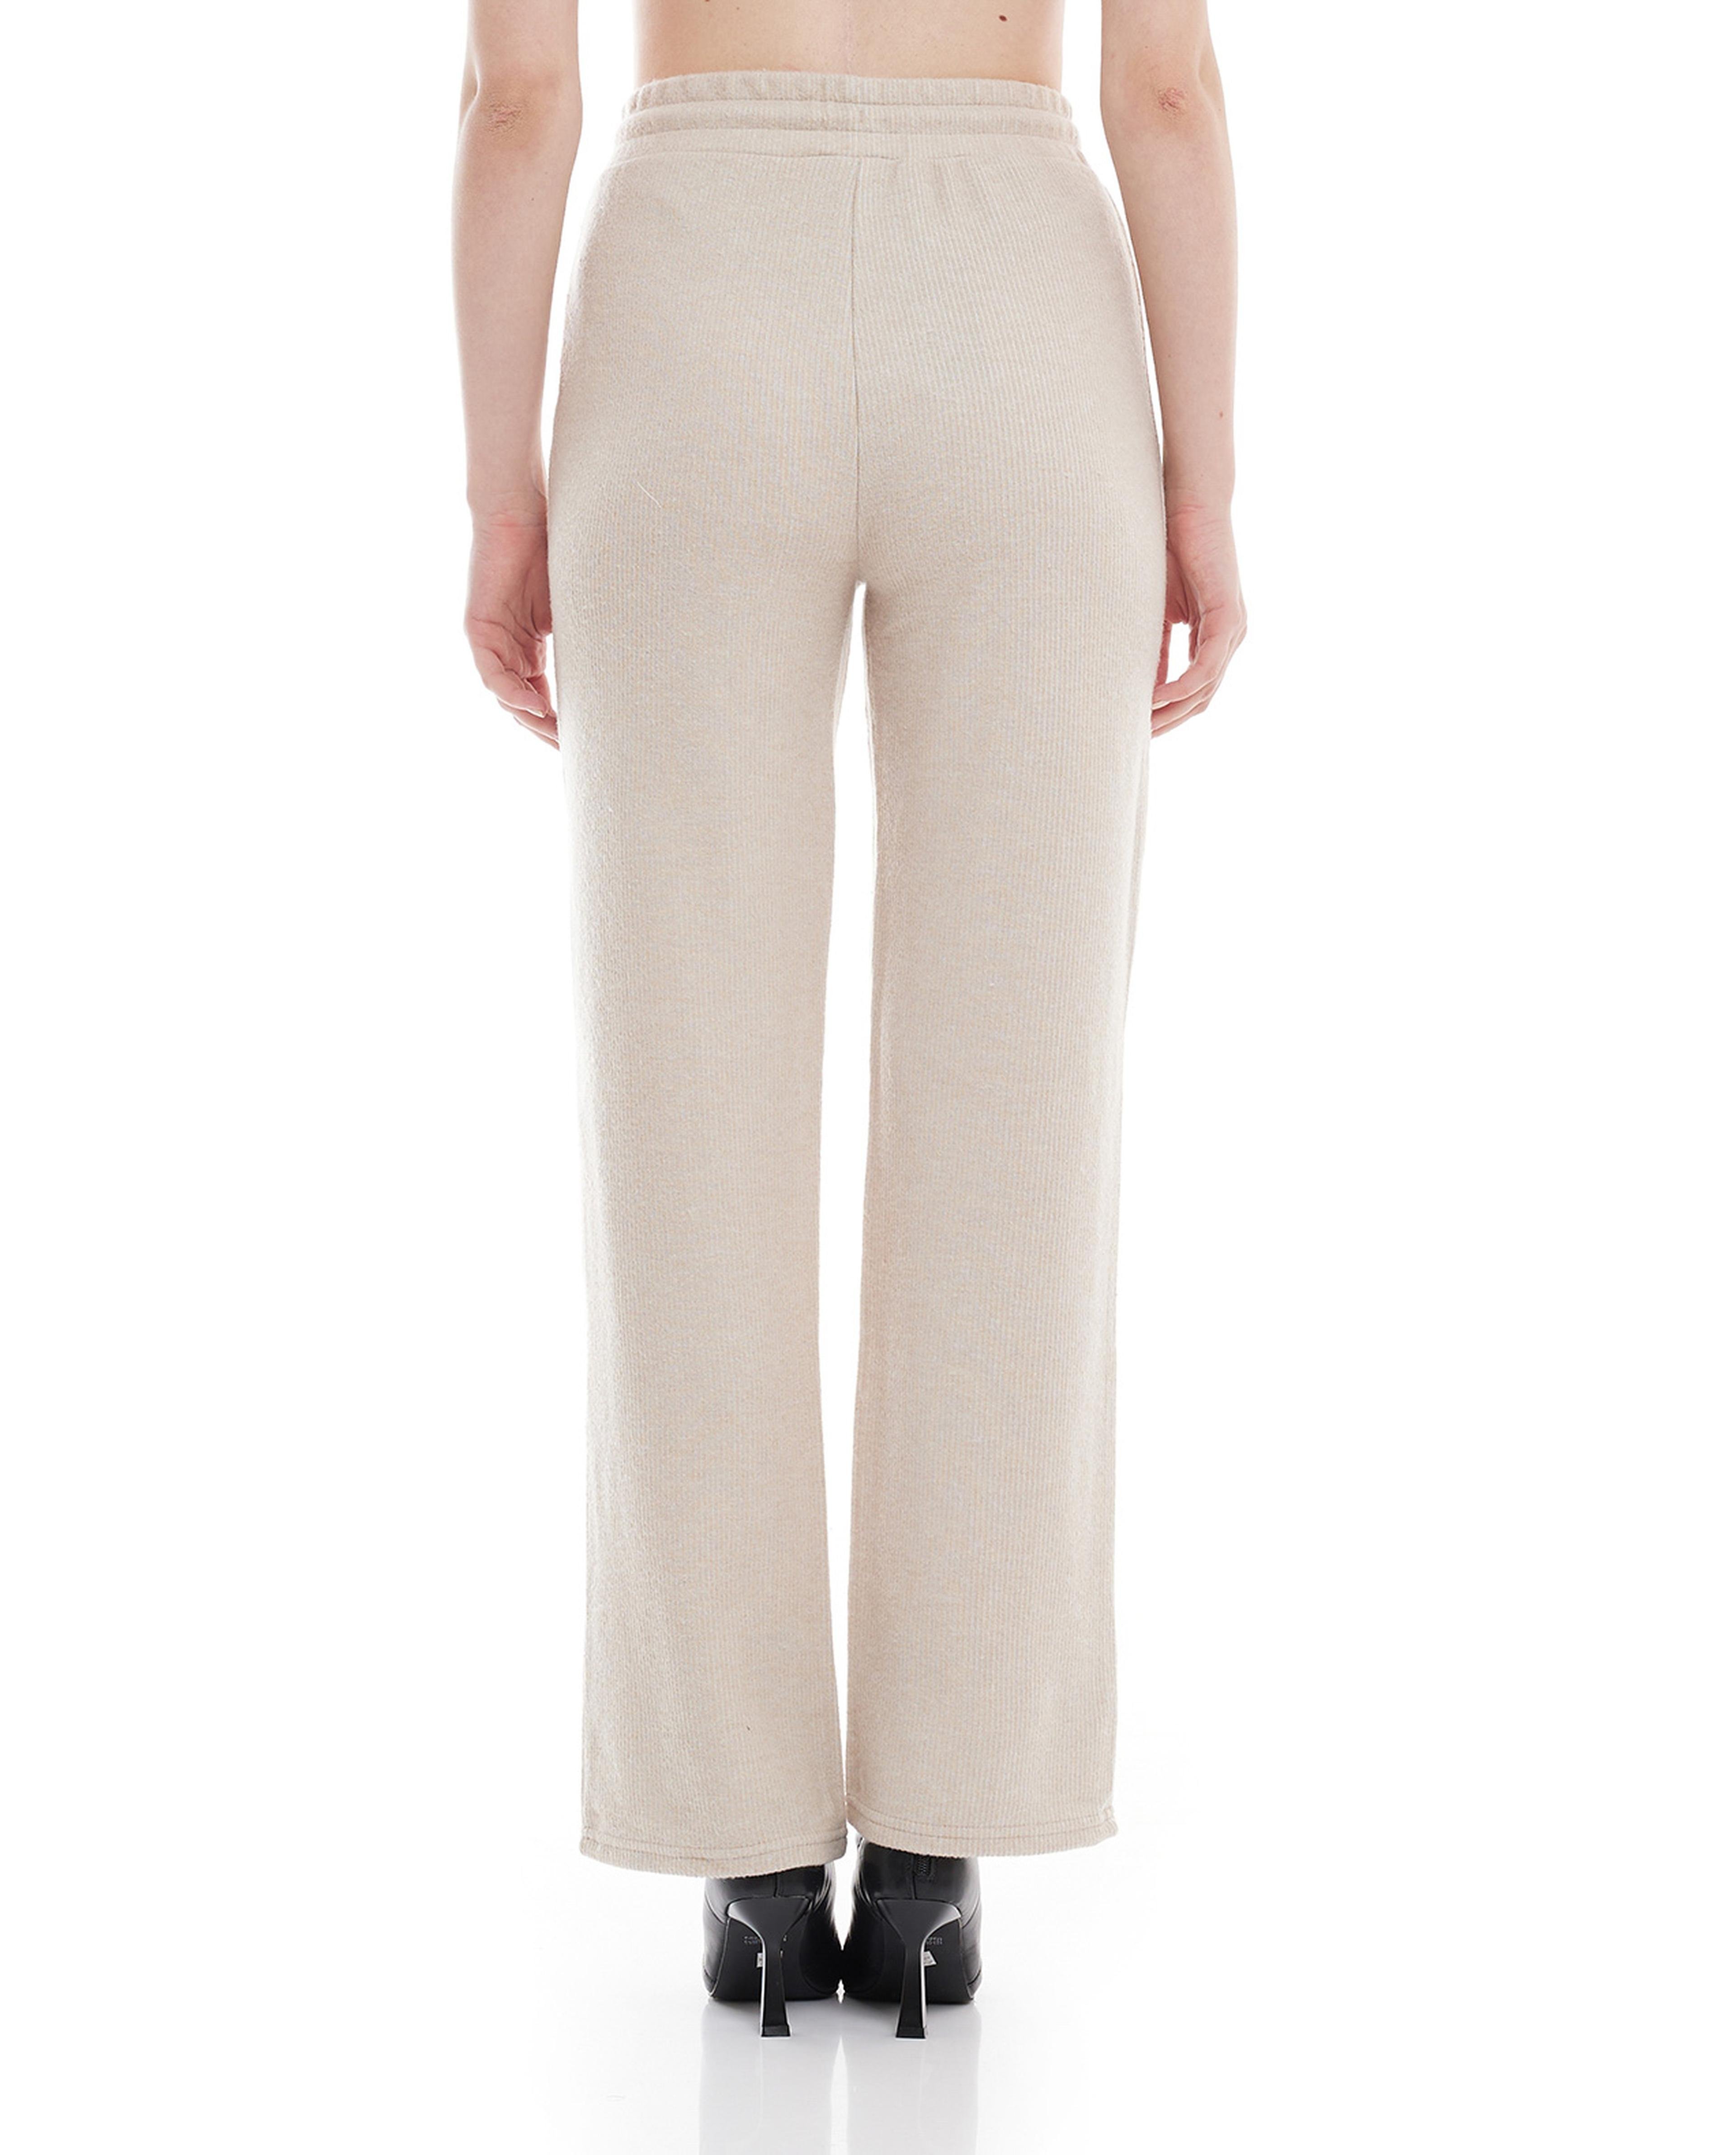 Ribbed Wide Leg Pants with Elastic Waist